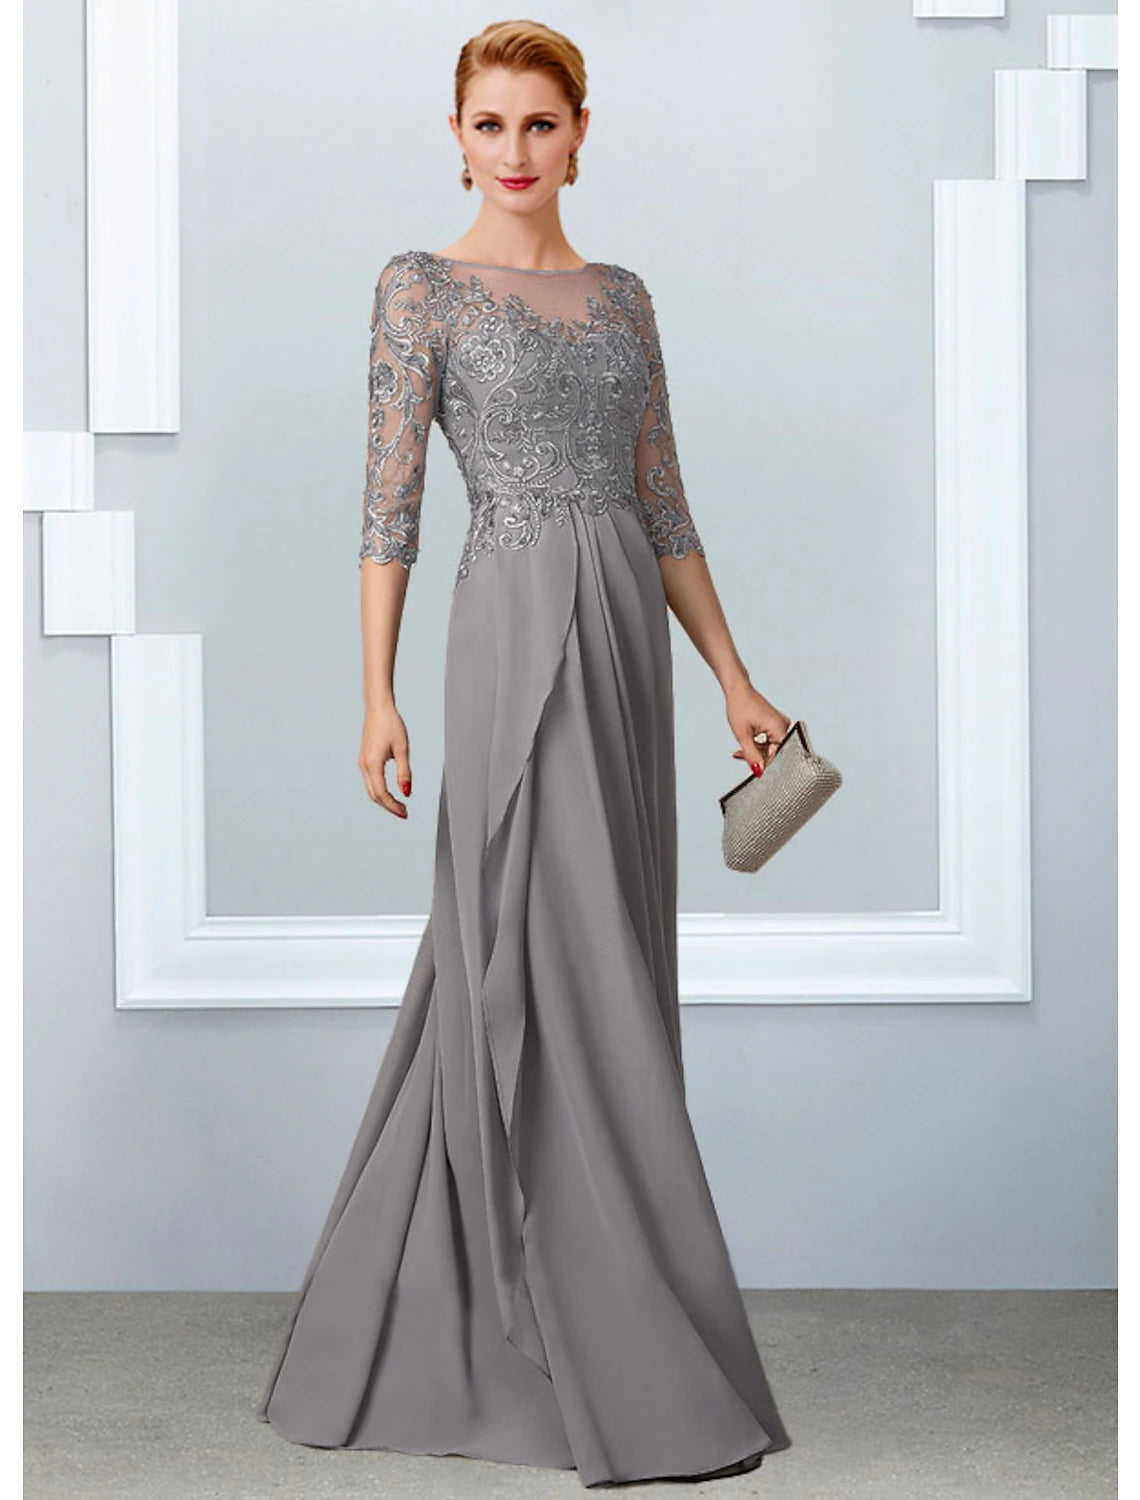 A-Line Mother of the Bride Dress Elegant Jewel Neck Floor Length Chiffon Lace Half Sleeve with Appliques